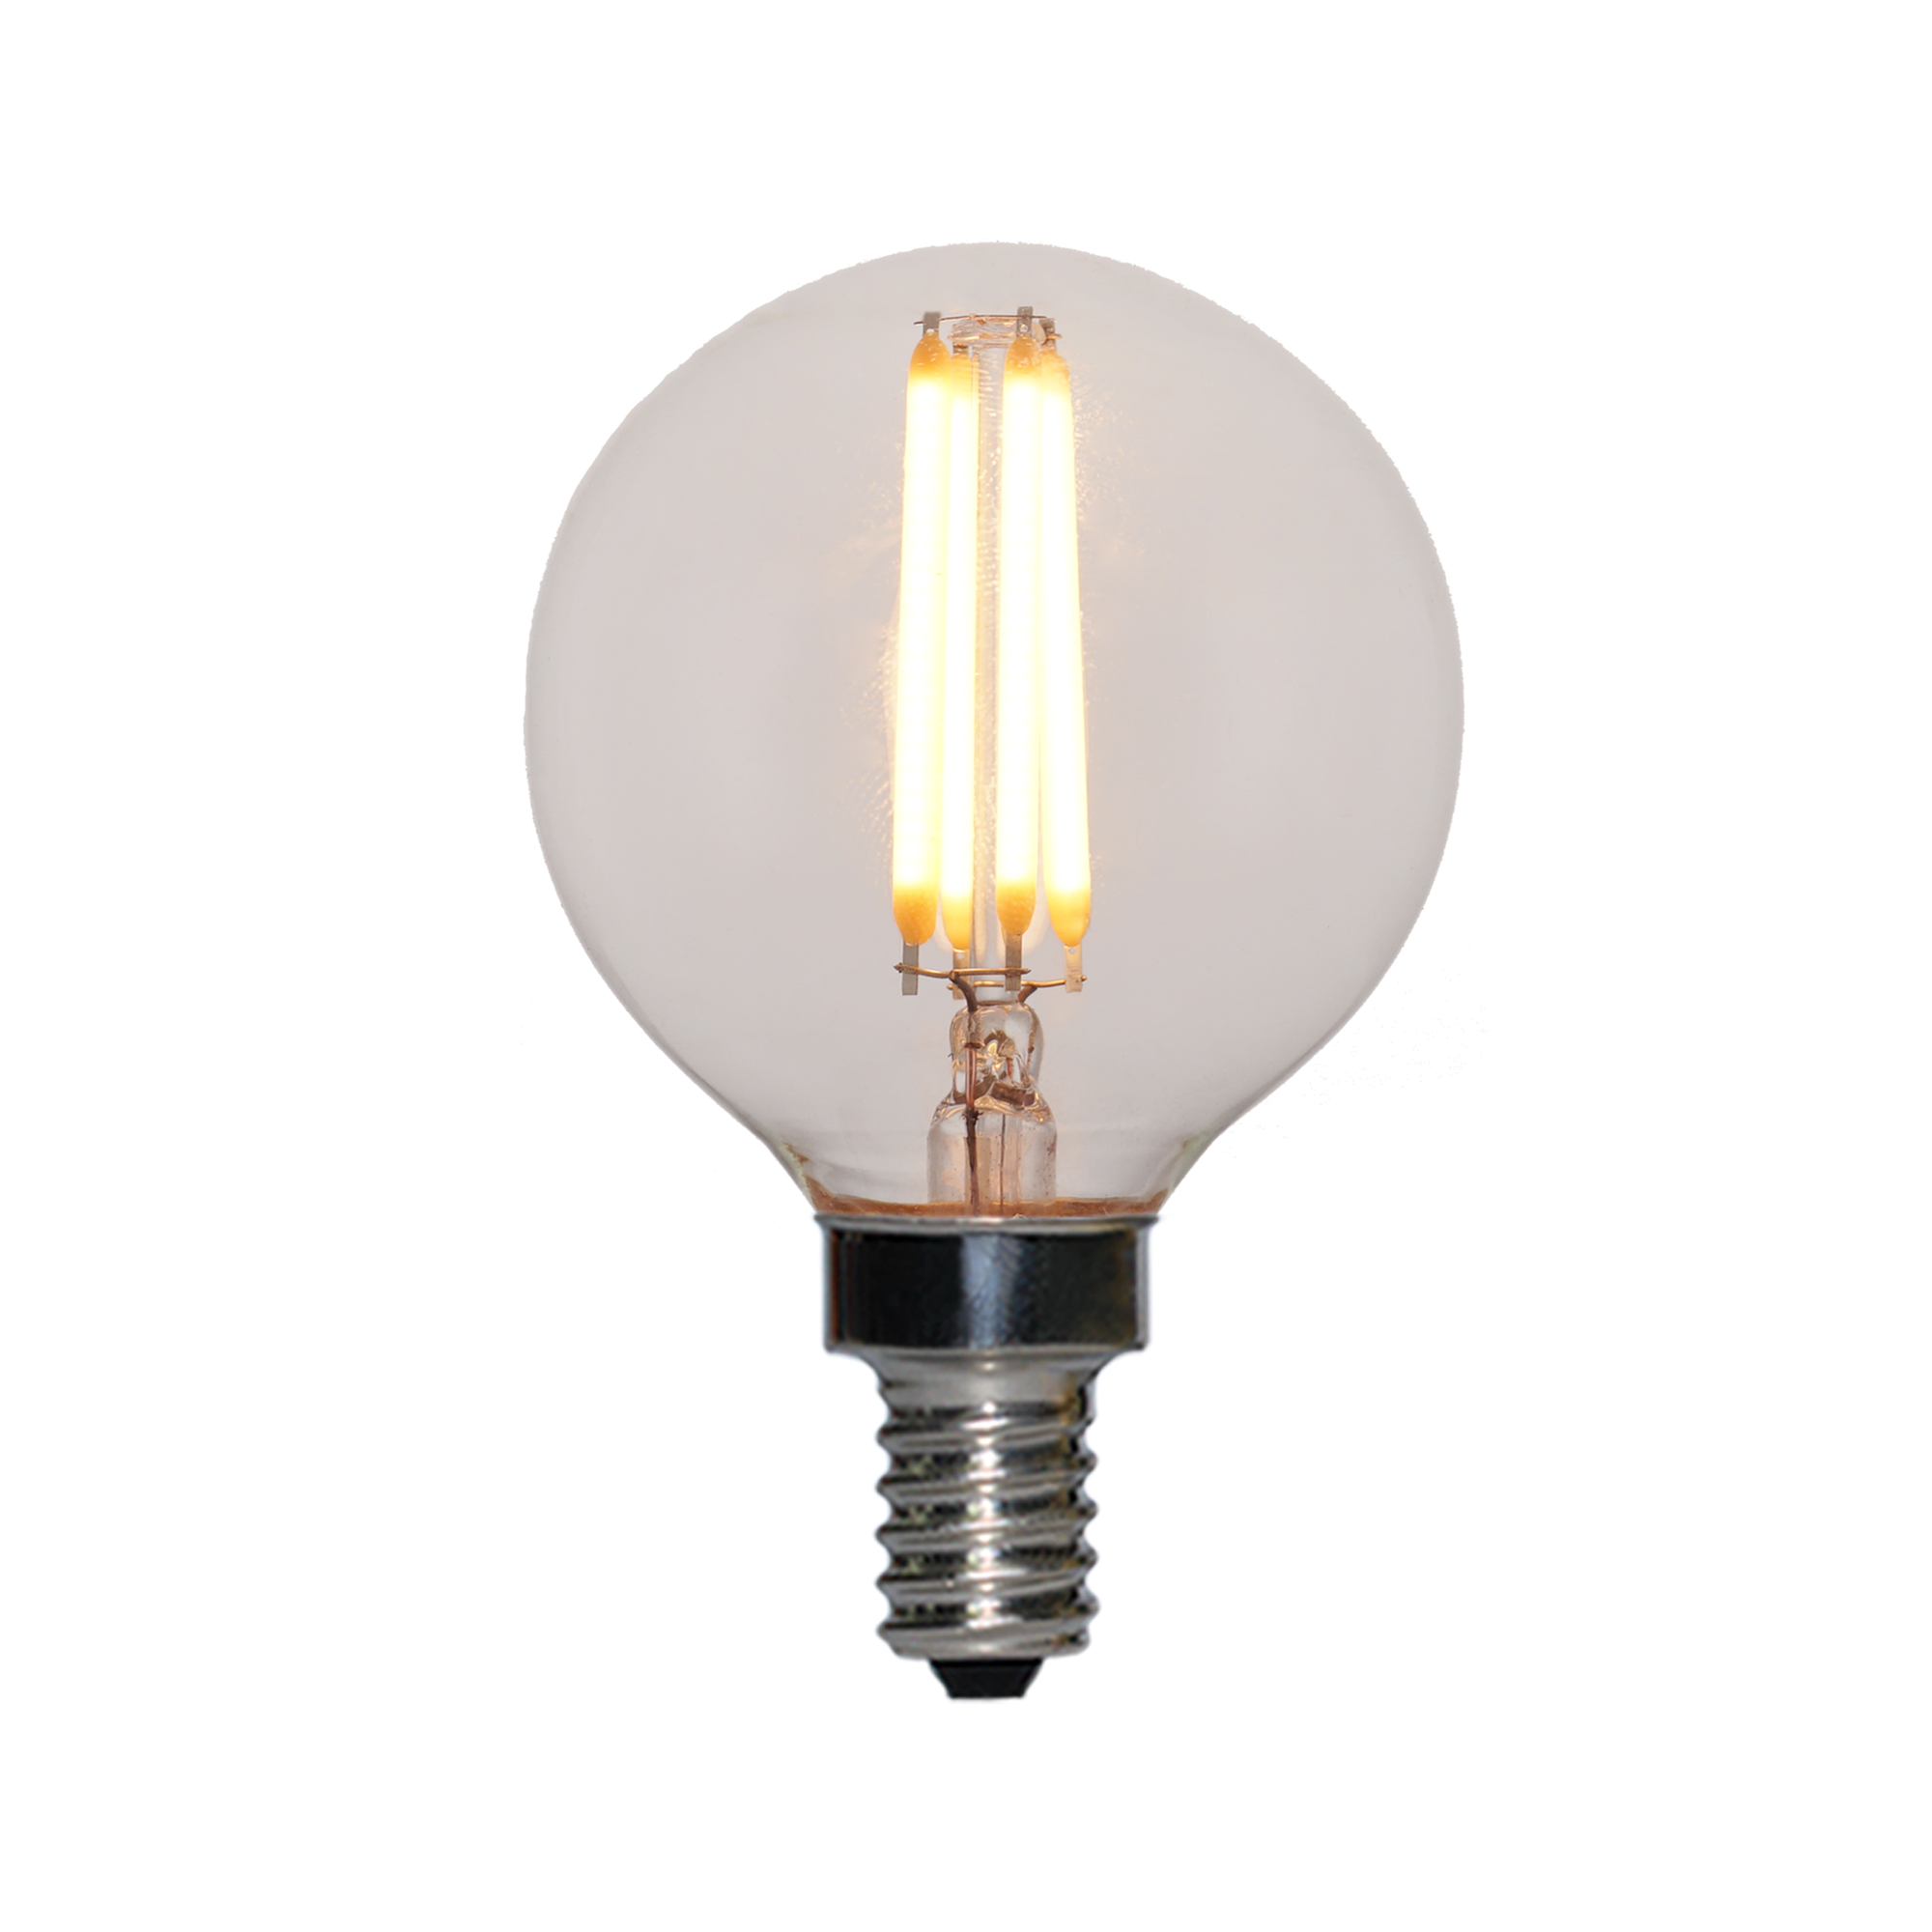 China Wholesale T30 Filament Bulb Factories -
 UL ES title 20, Title 24 and JA8 Certified  listed led Edison bulbs G16.5 A19 S19 S21 G25 G30 G40 – Omita